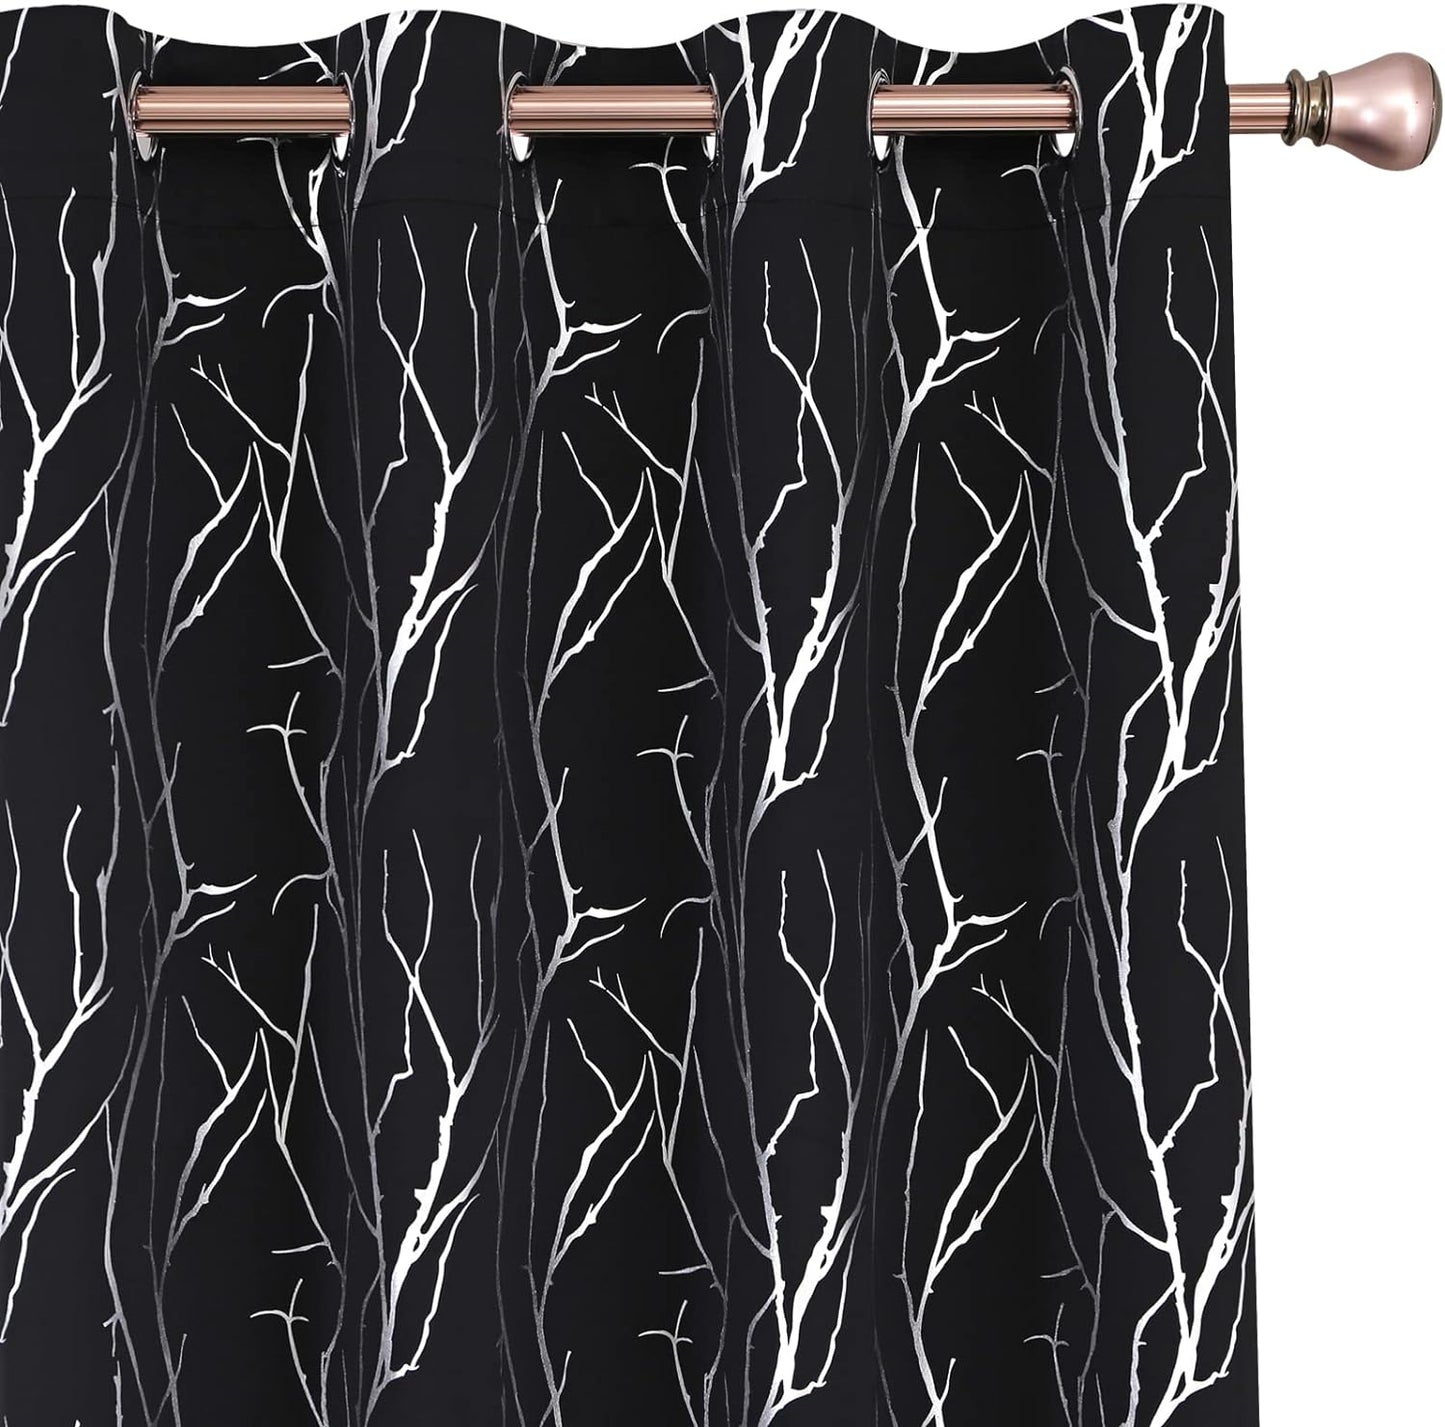 SMILE WEAVER Black Blackout Curtains for Bedroom 72 Inch Long 2 Panels,Room Darkening Curtain with Gold Print Design Noise Reducing Thermal Insulated Window Treatment Drapes for Living Room  SMILE WEAVER Tree Branch-Black 52Wx96L 